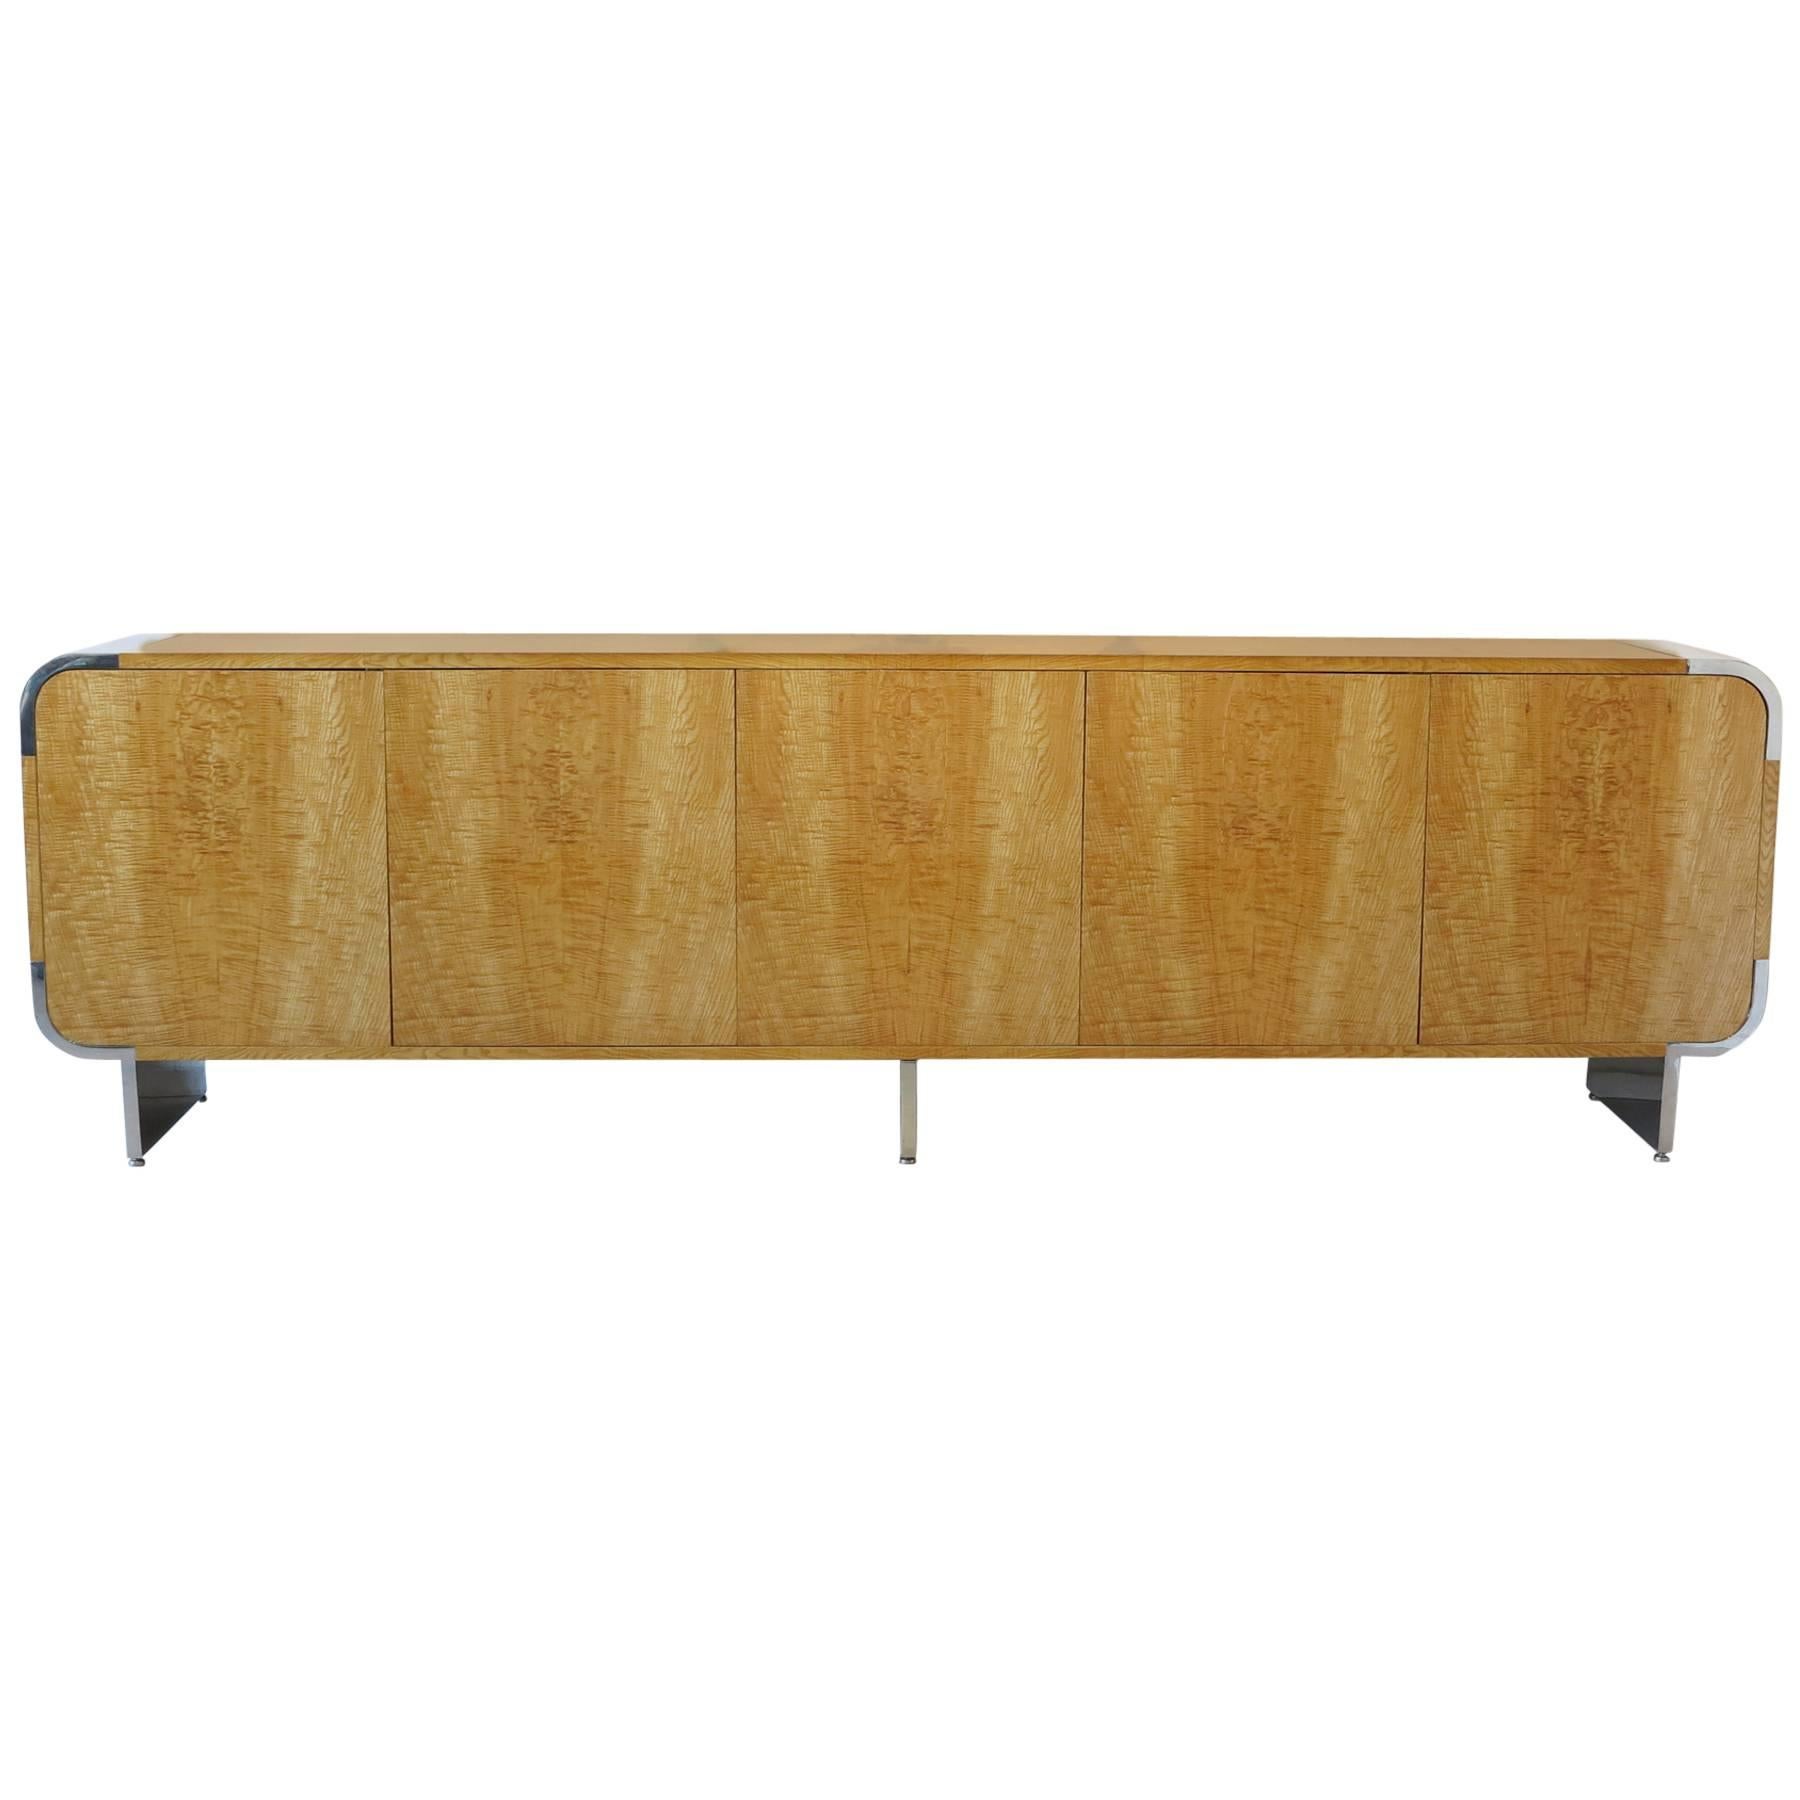 Large Pace Cabinet by Leon Rosen (10 feet long)